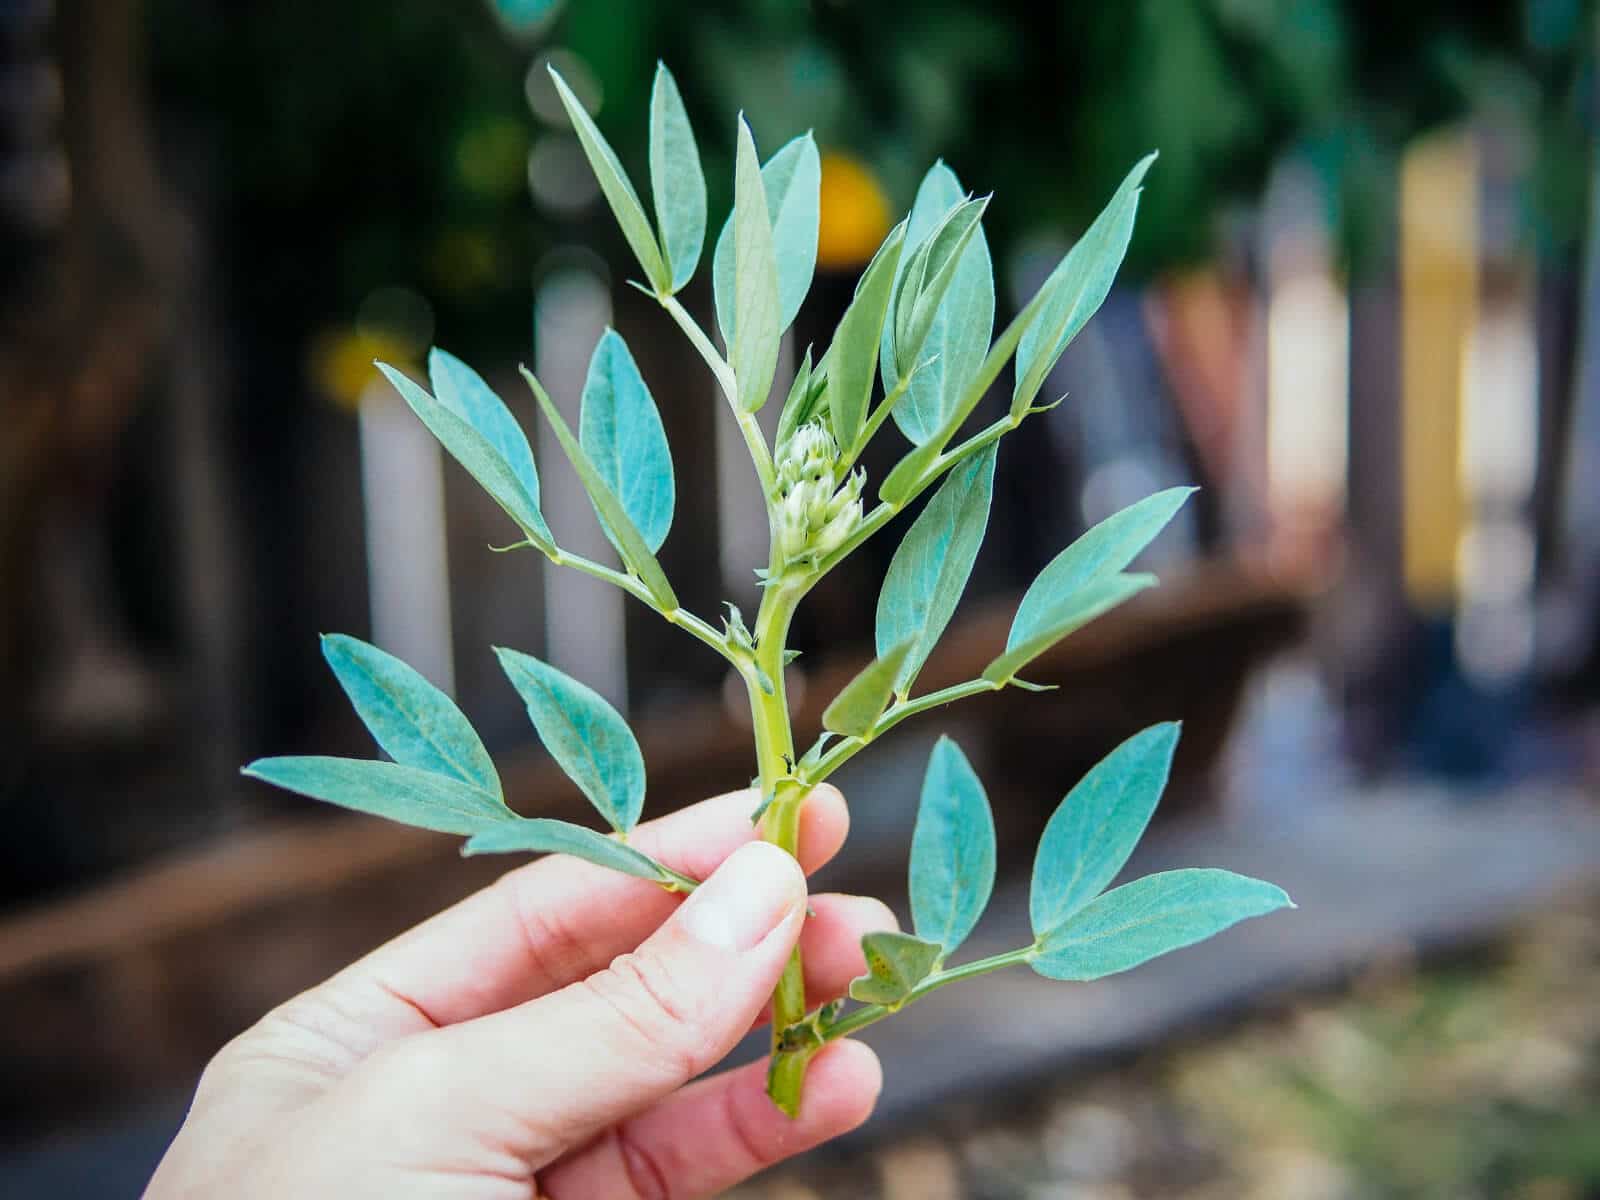 Holding up a sprig of edible fava greens